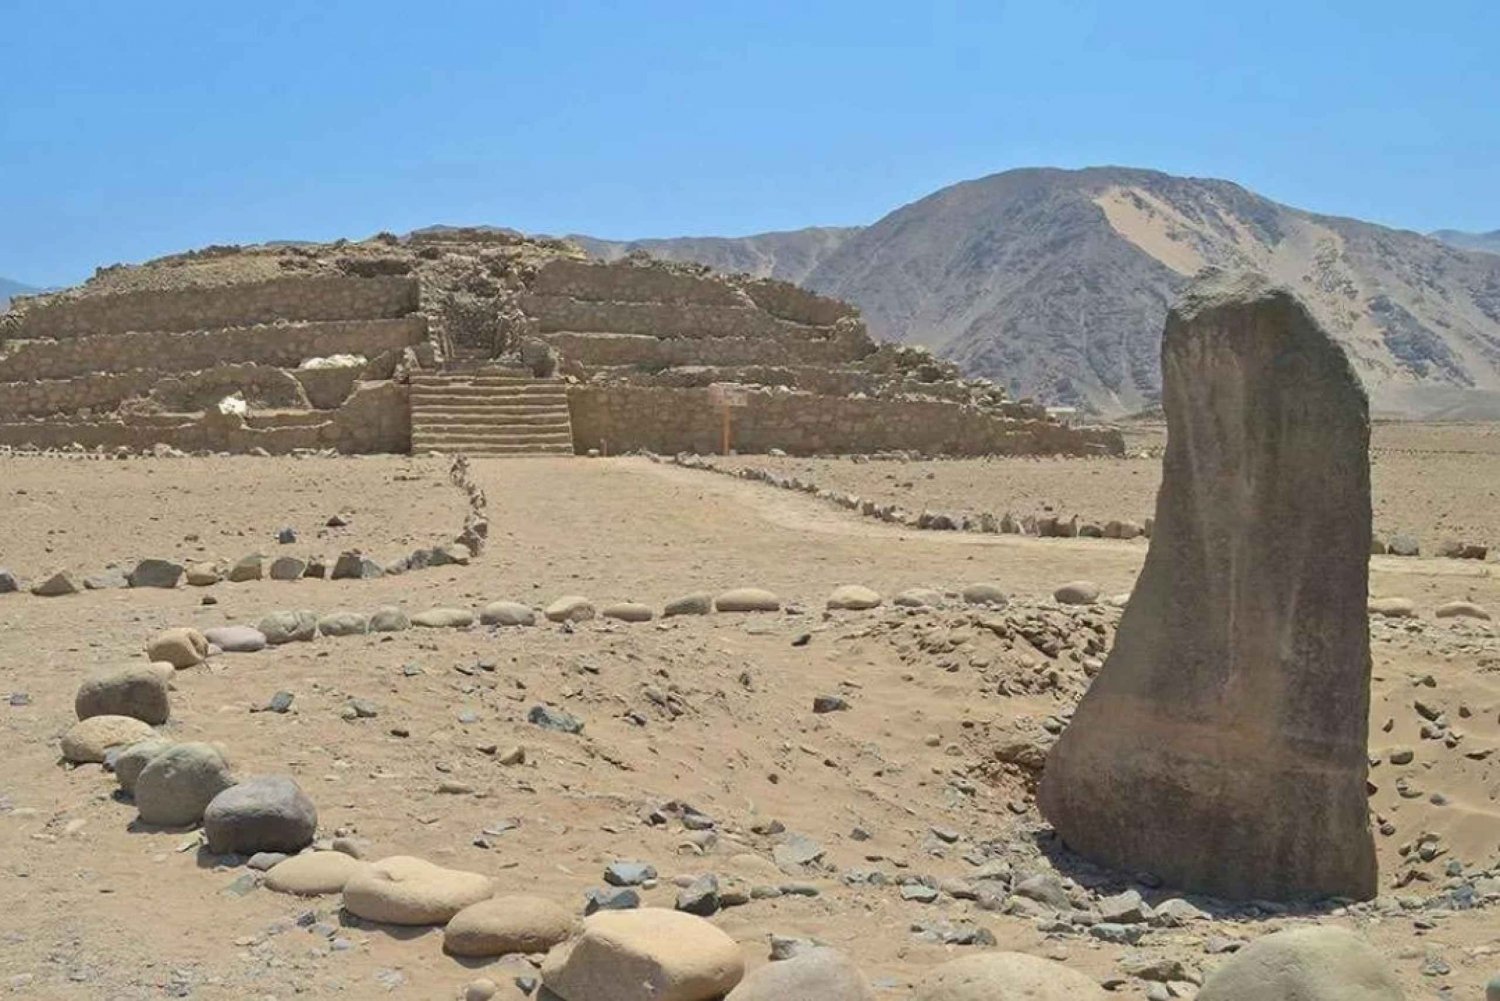 From Lima: Caral - The Oldest Civilization in America